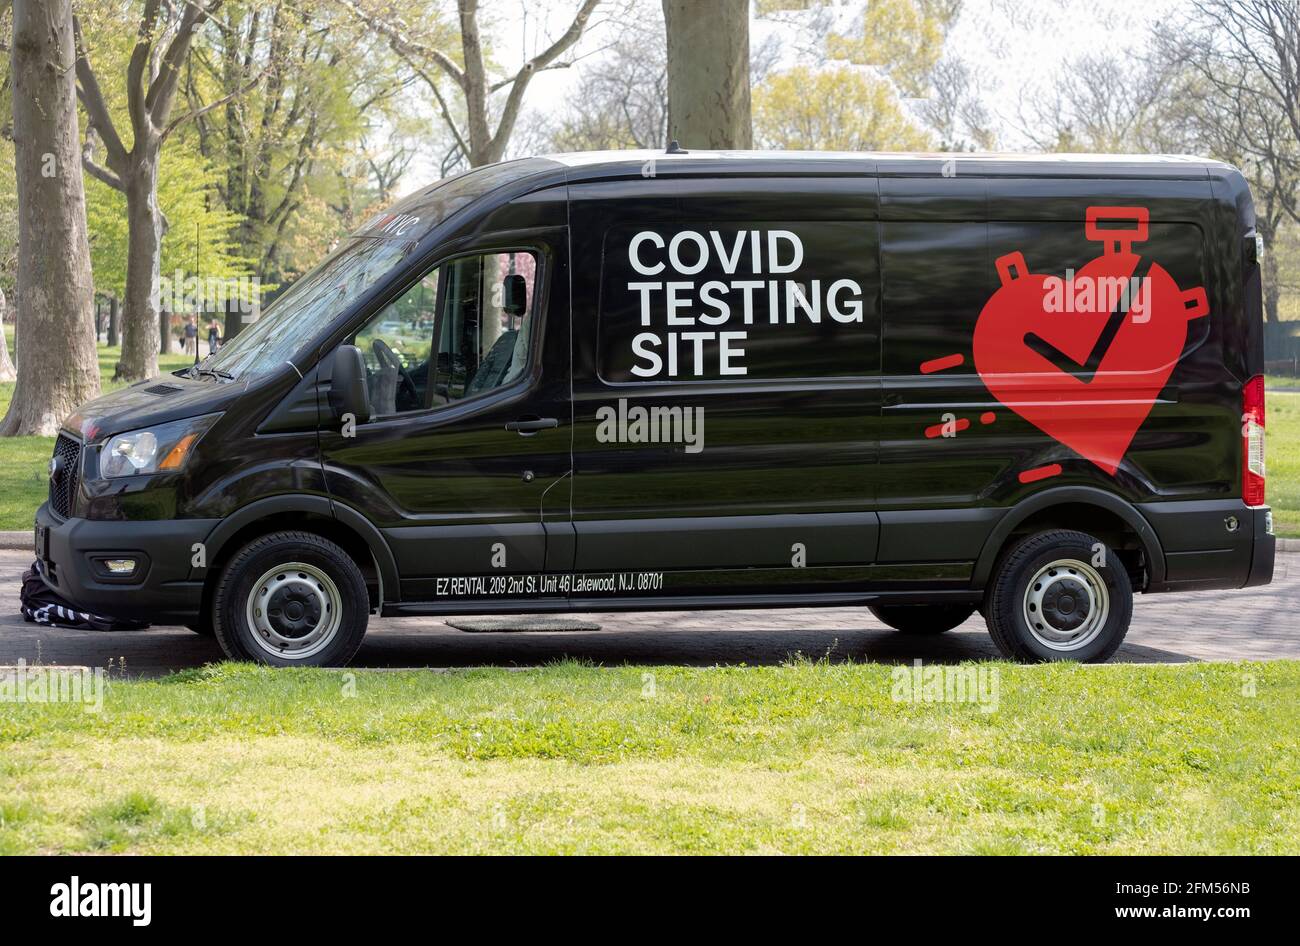 A Rapid NYC covid testing truck parked in Flushing Meadows Corona Park in Queens, New York. Stock Photo